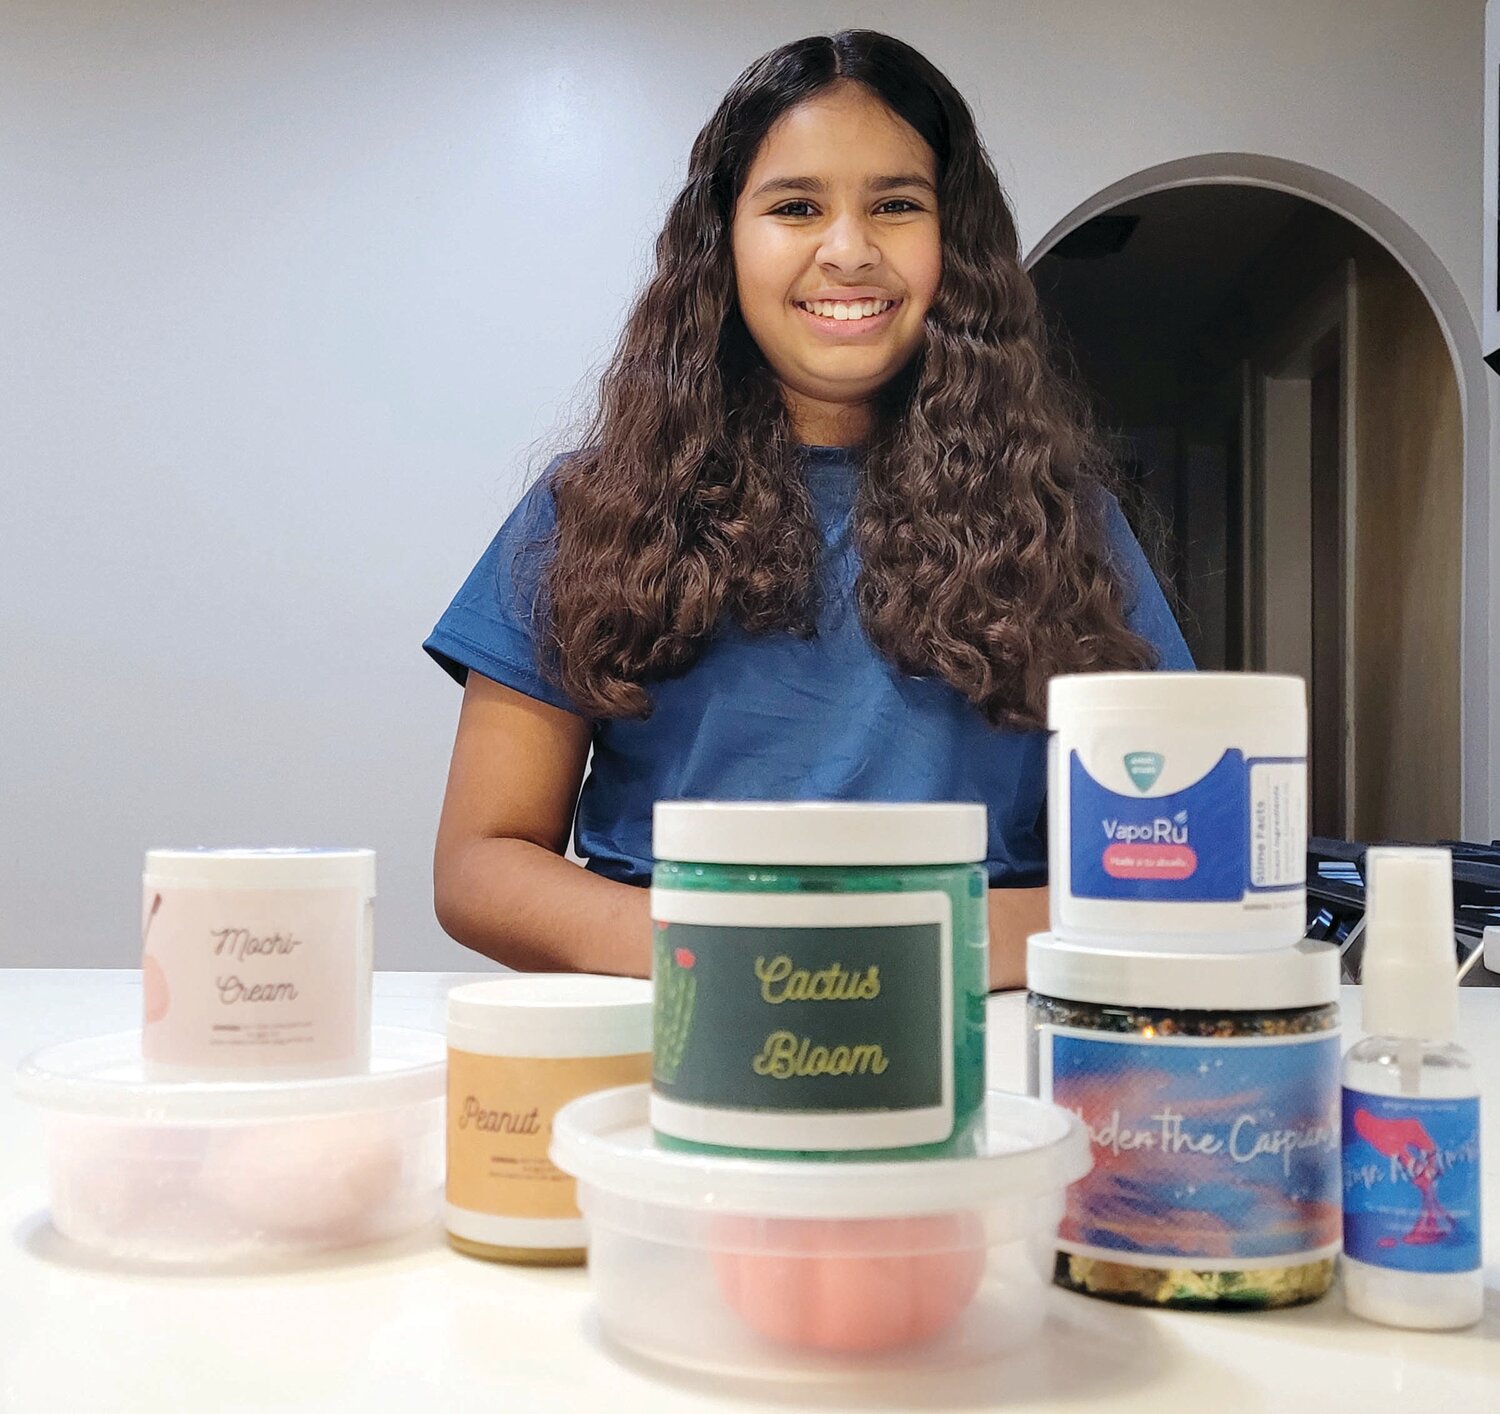 SLIME TIME DEBUT: At 12 years old, Penelope Santos may be one of the Ocean State’s youngest entrepreneurs. The founder of Angel Stars Slime LLC makes and sells all sorts of slime. She and her mother recently secured a business license from the town of Johnston. Penelope addressed questions from Town Council members and smiled wide after they approved her business license.